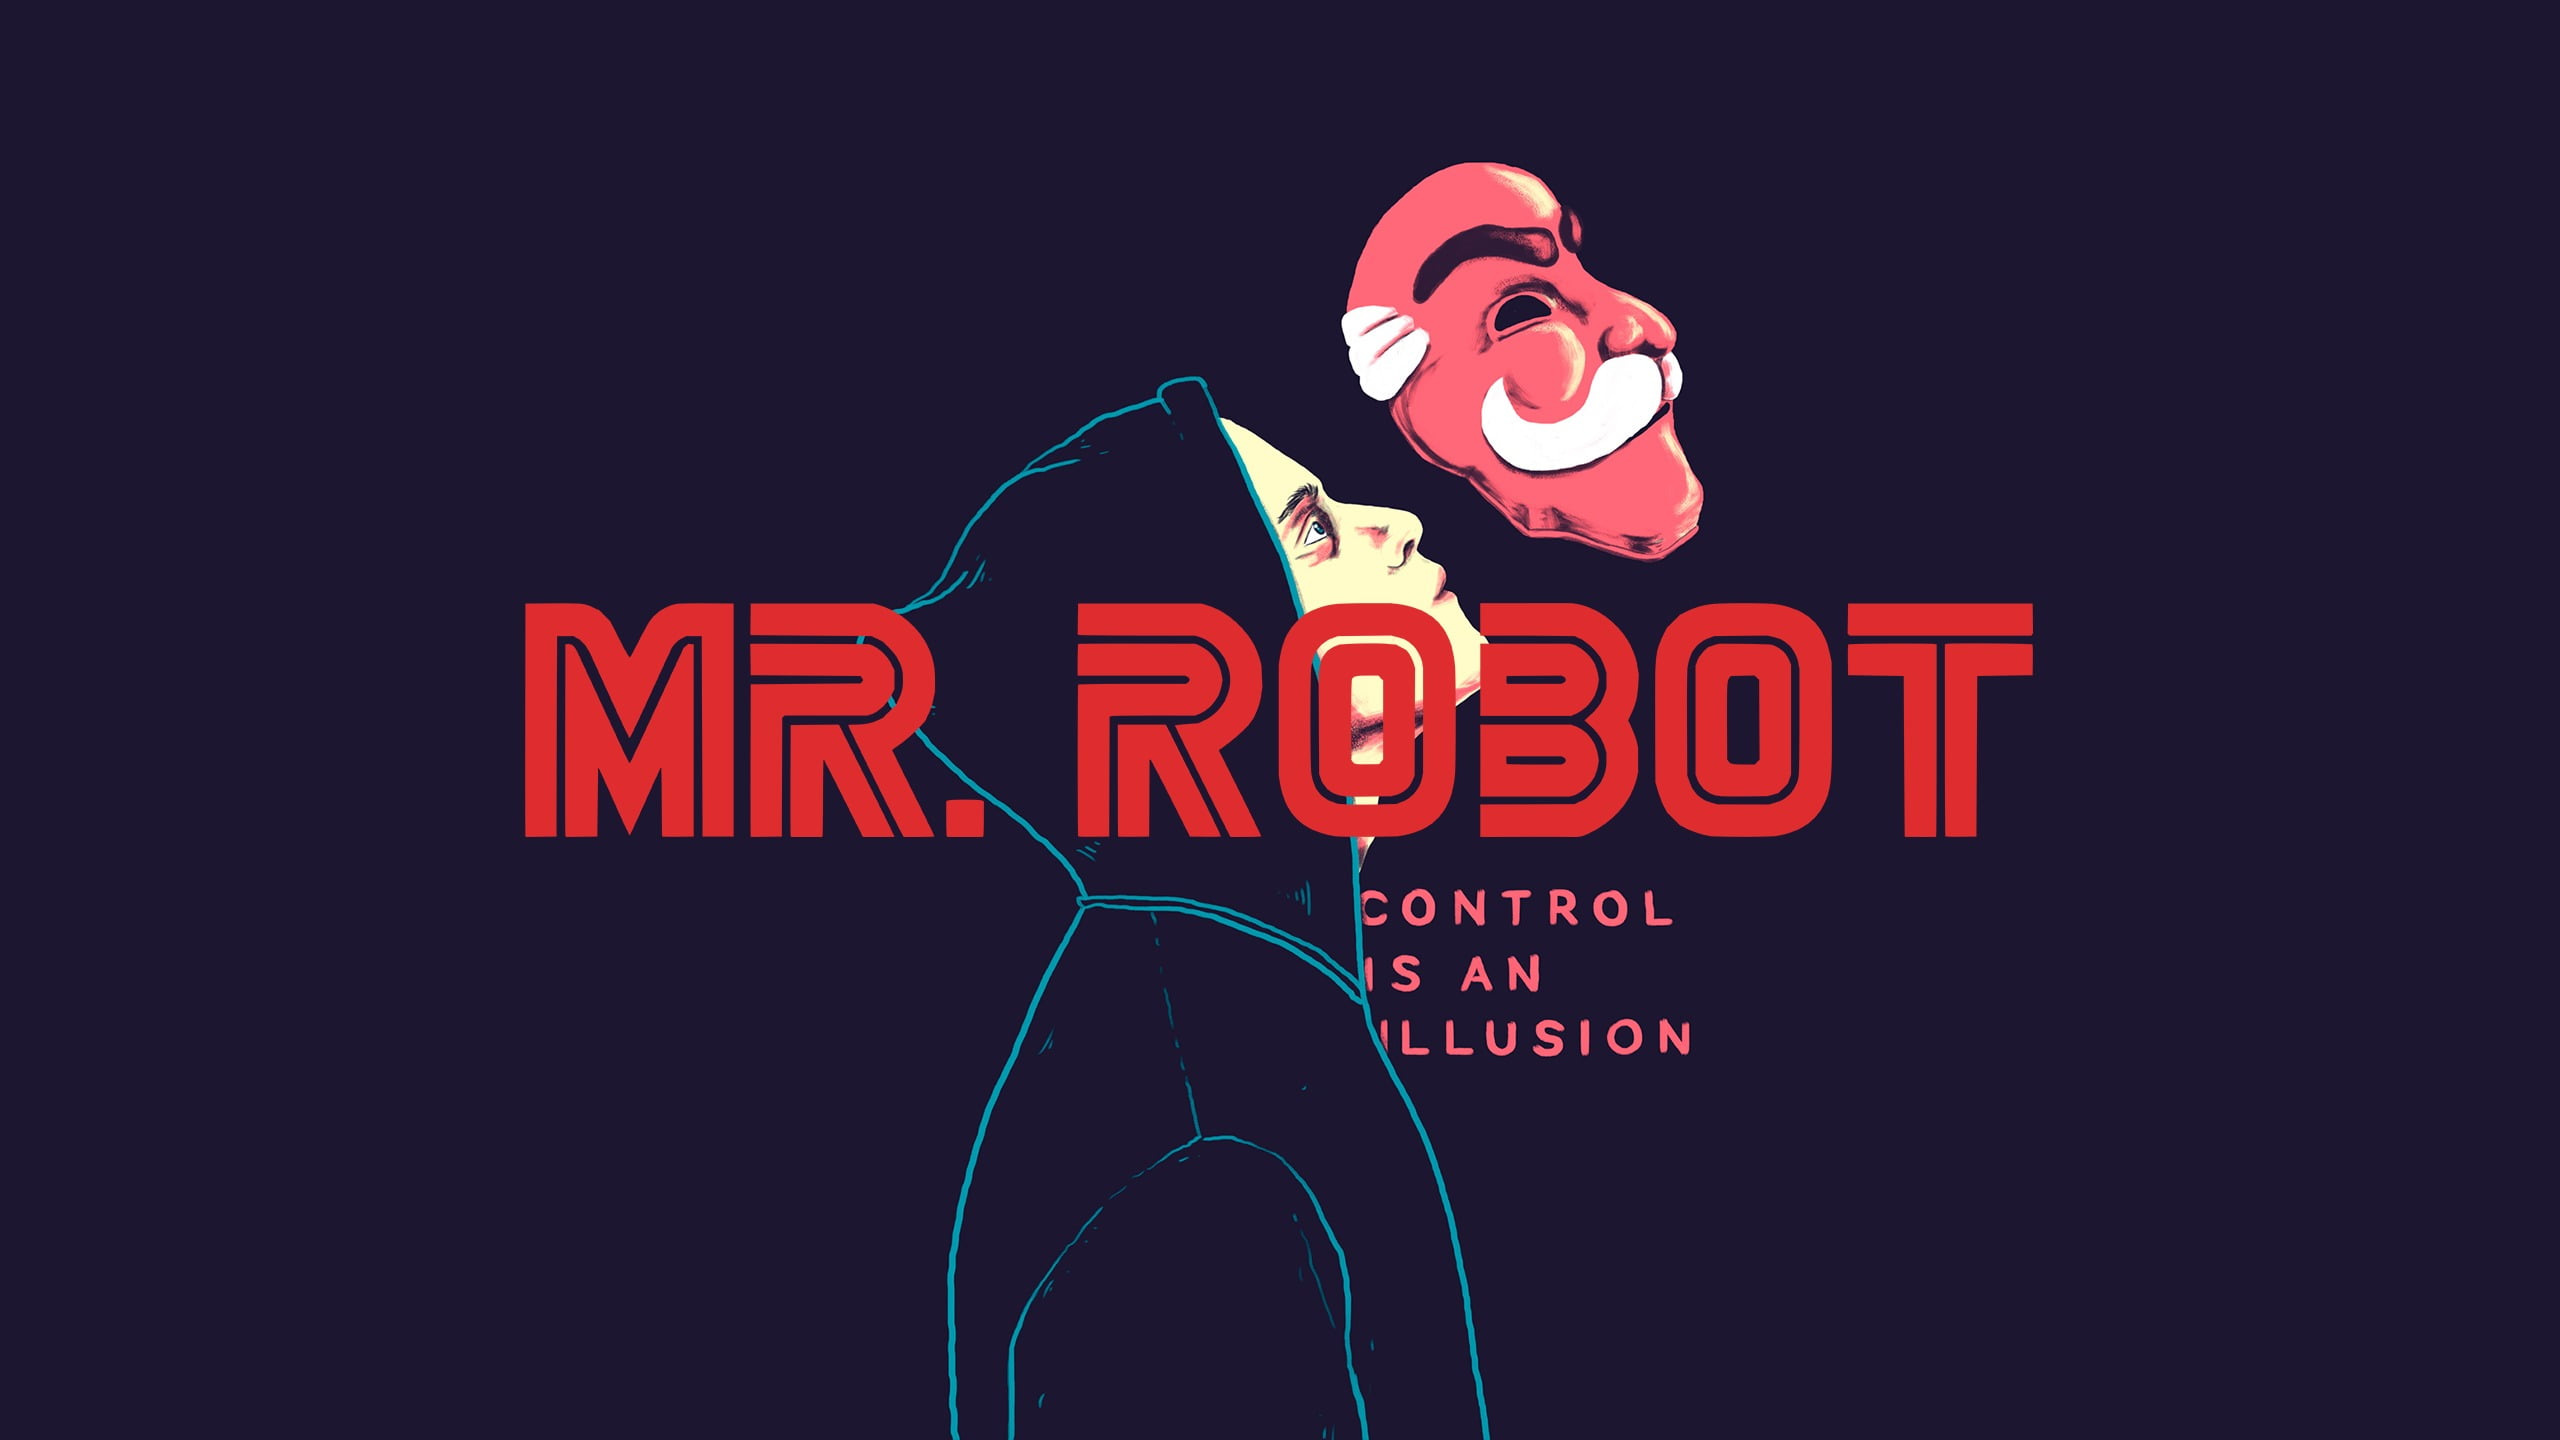 Mr. Robot Control is an Illusion, Elliot (Mr. Robot), fsociety